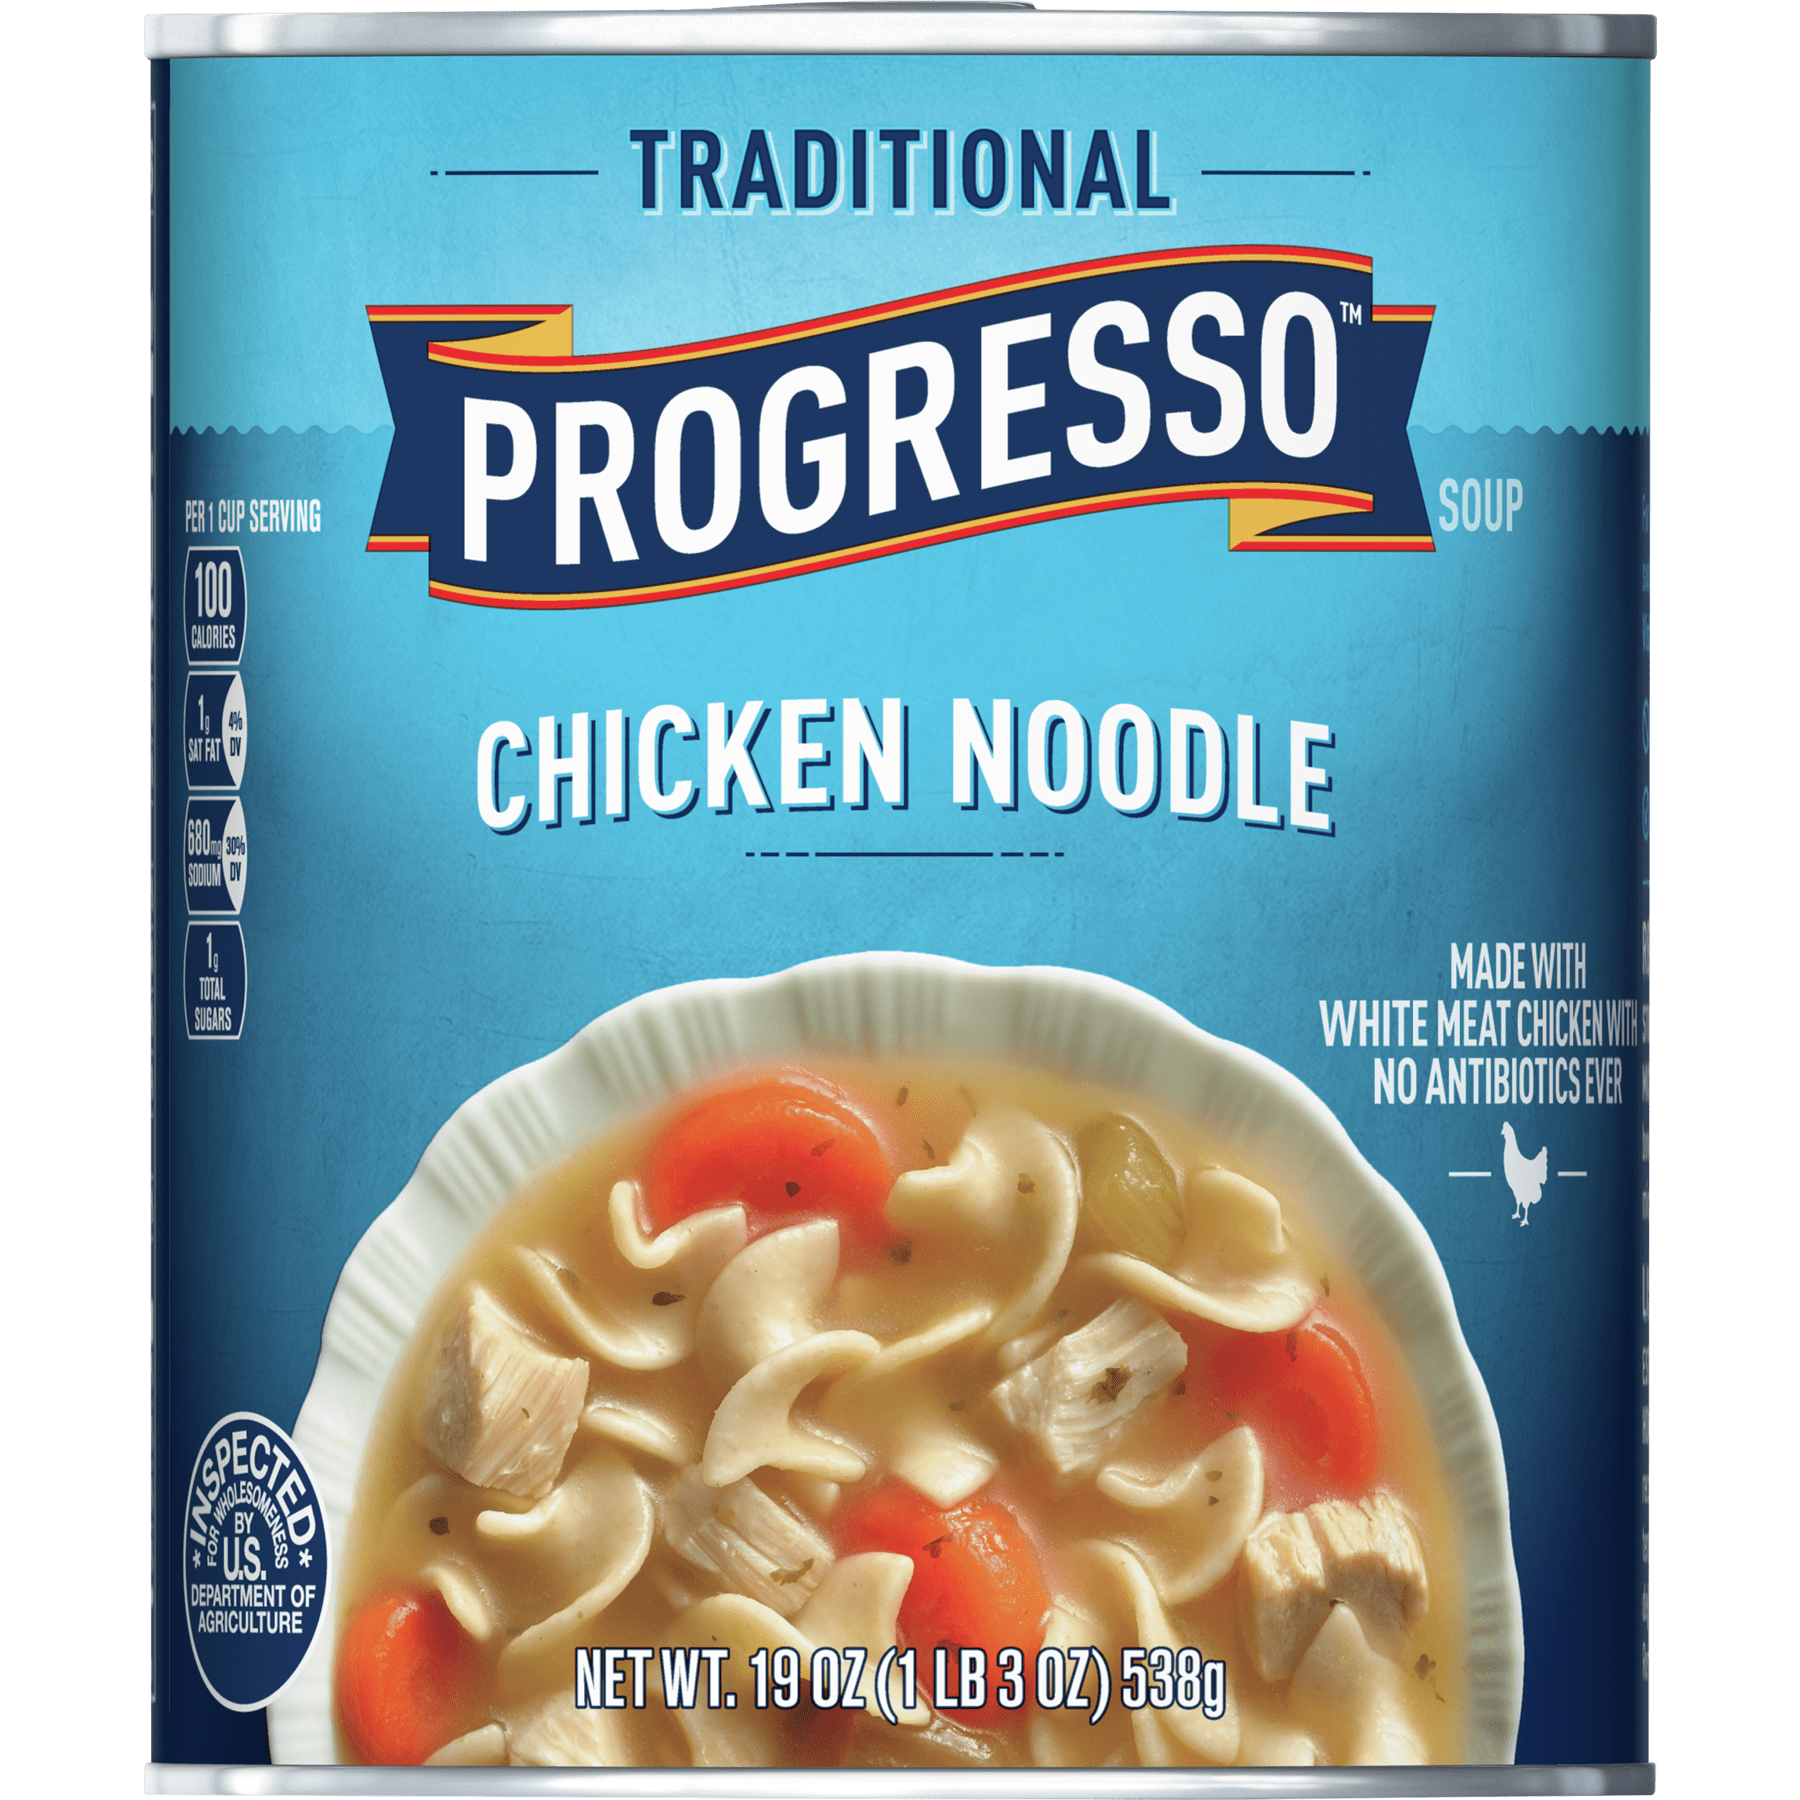 Enjoy one of your favorite comfort foods with Progresso Traditional Chicken ...